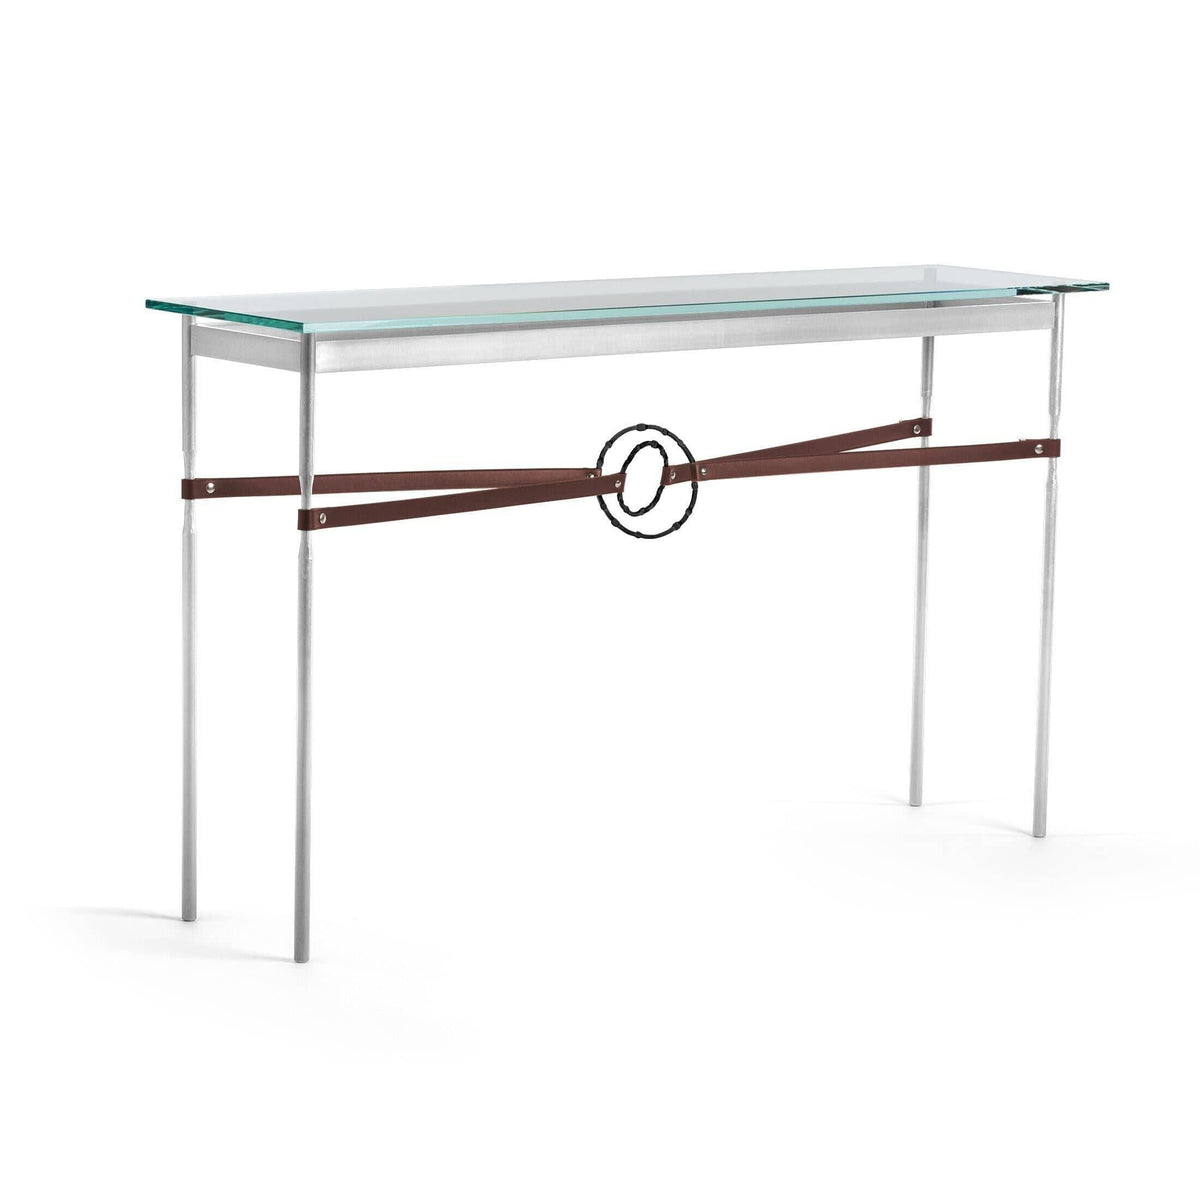 Hubbardton Forge - Equus Brown Leather Console Table - 750118-85-10-LB-VA0714 | Montreal Lighting & Hardware